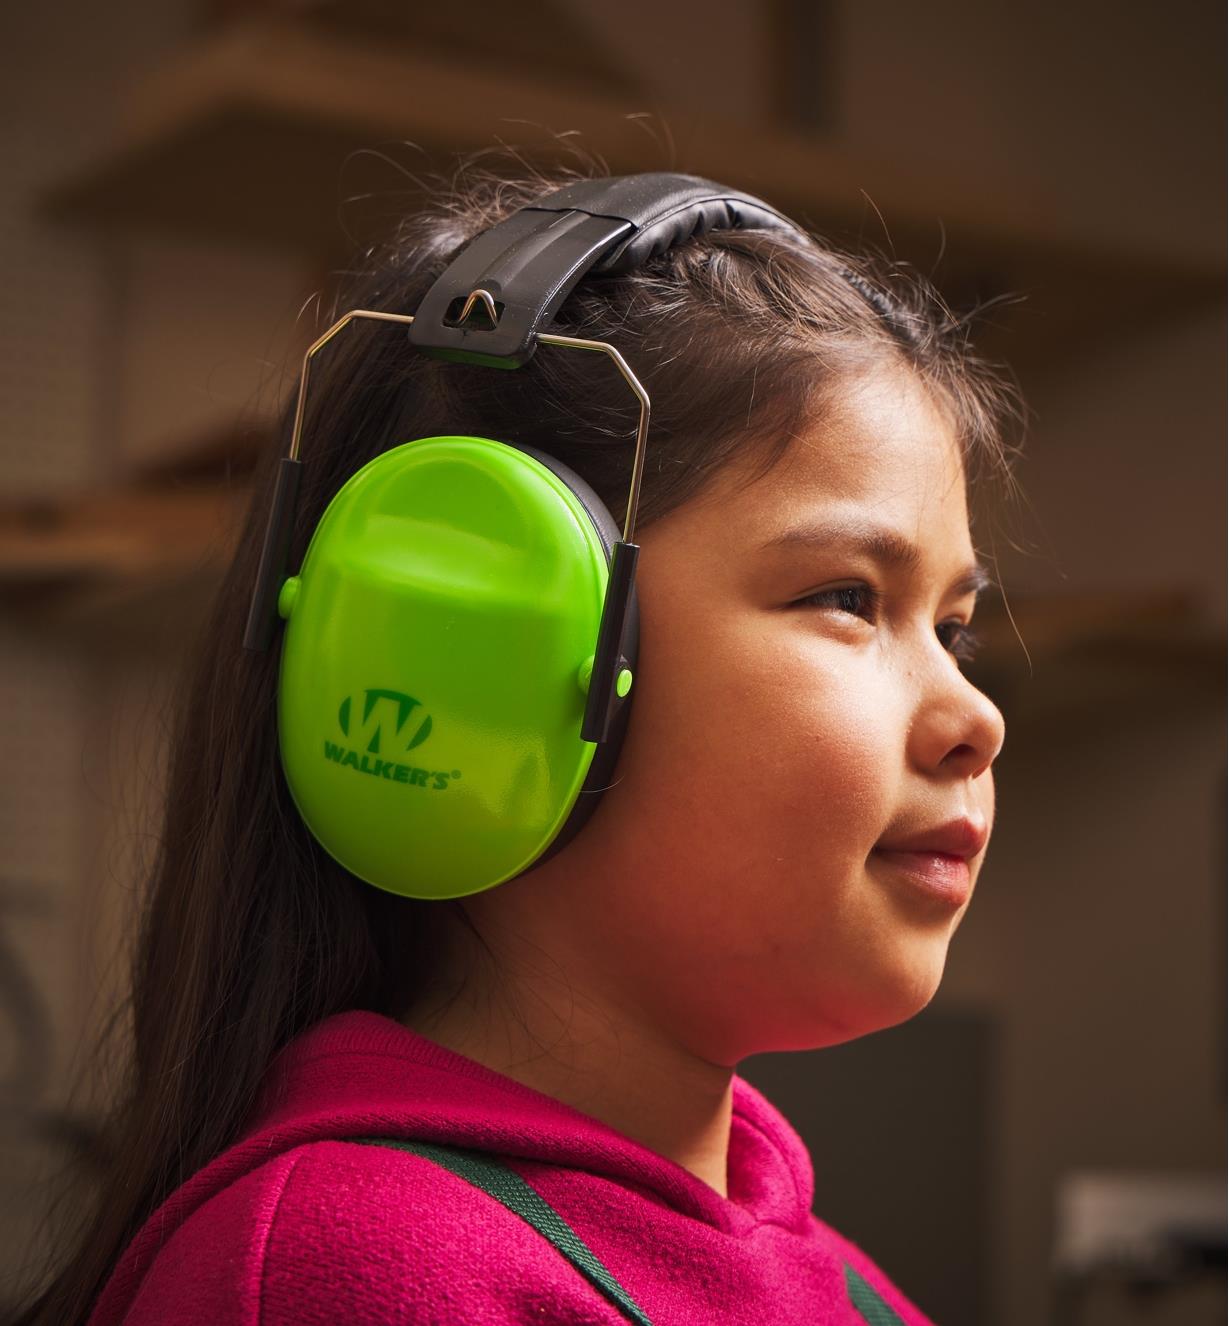 A child in profile wearing hearing protectors